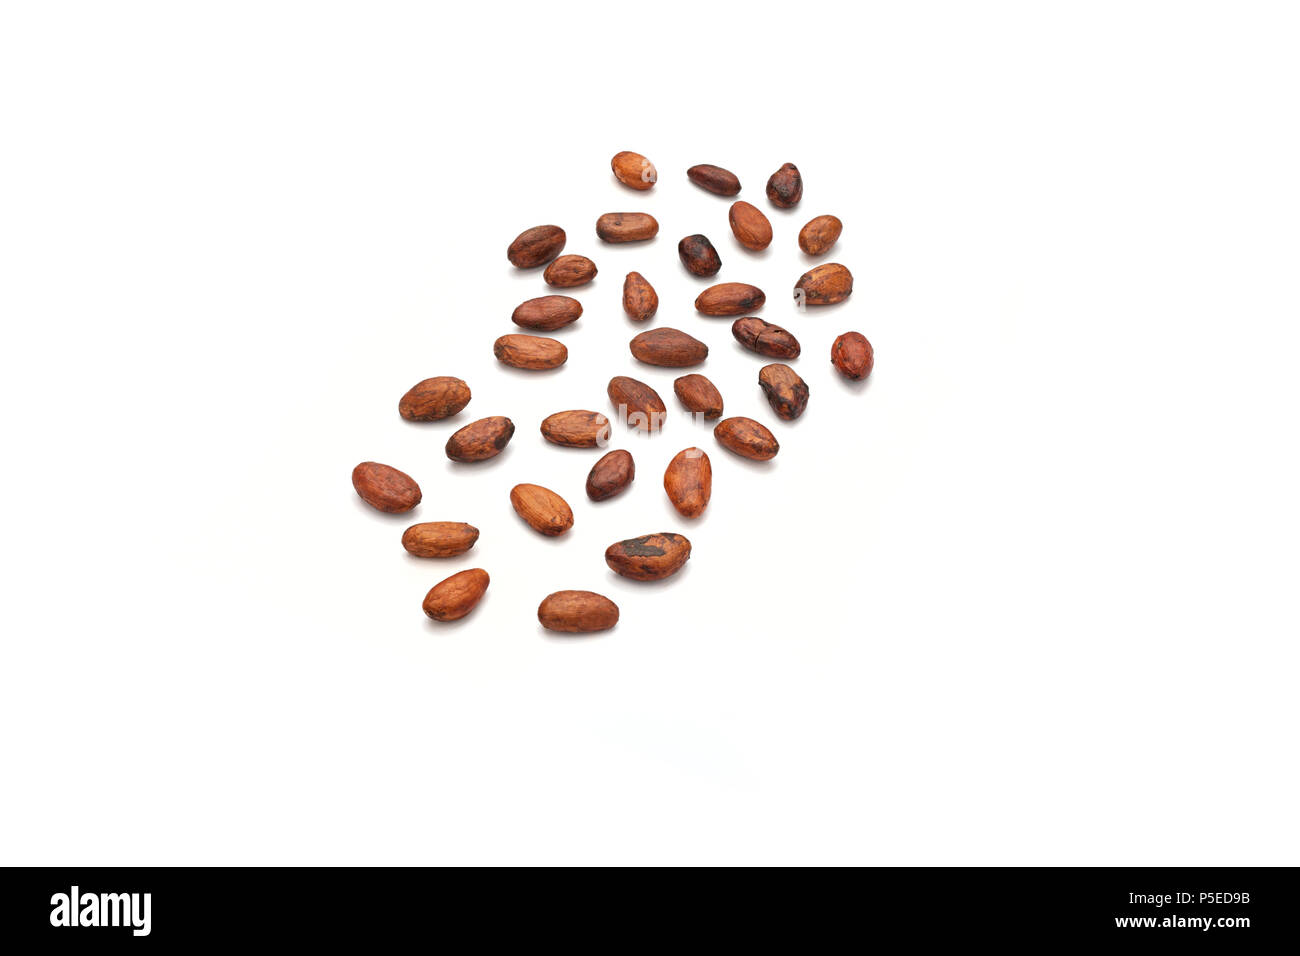 Cocoa beans (Theobroma cacao) photographed in the studio on a white background. Stock Photo